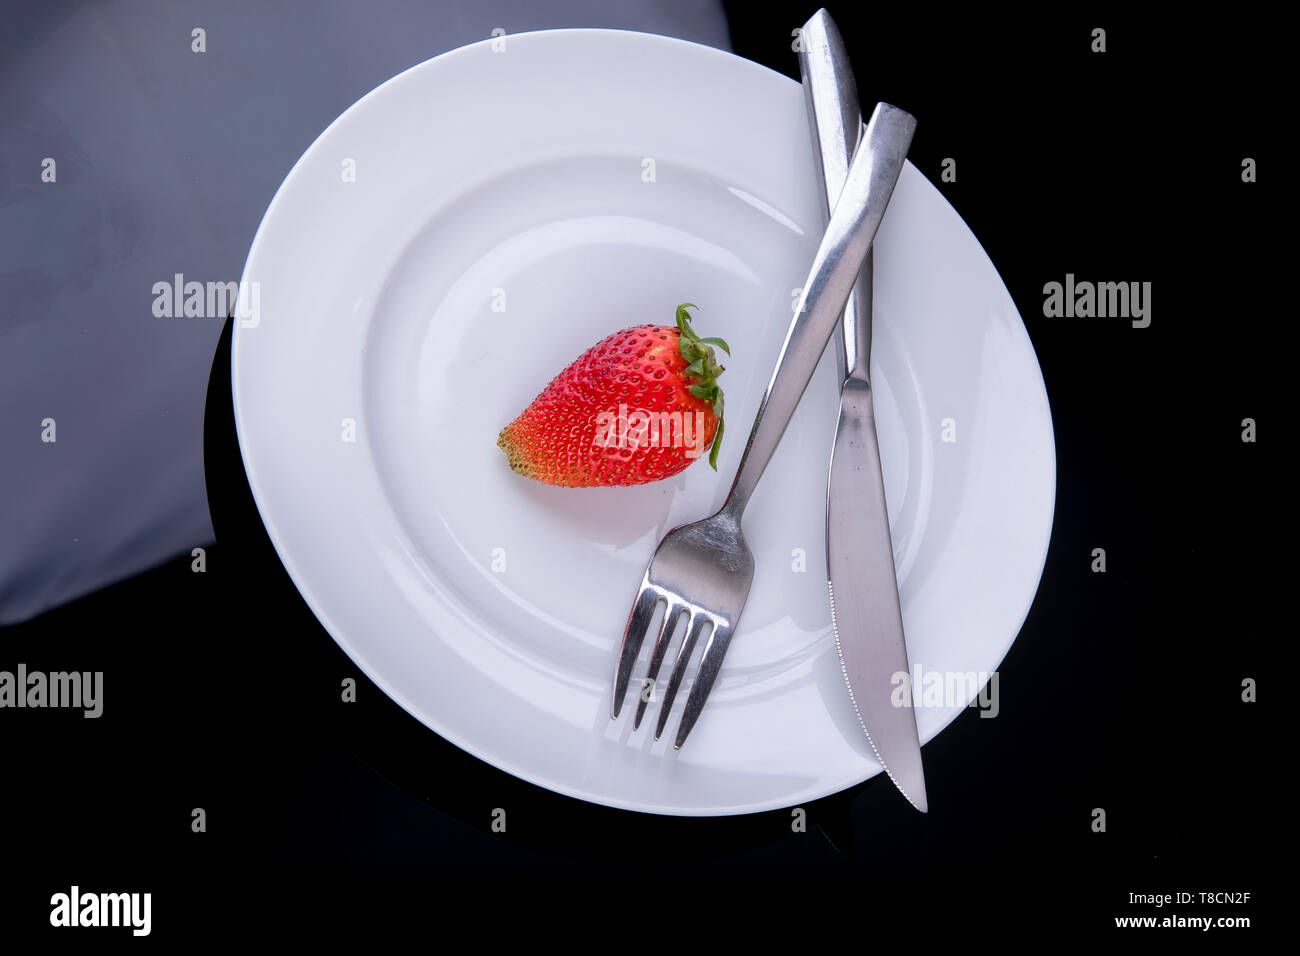 lonely strawberry on a white plate with cutlery as diet plan Stock Photo